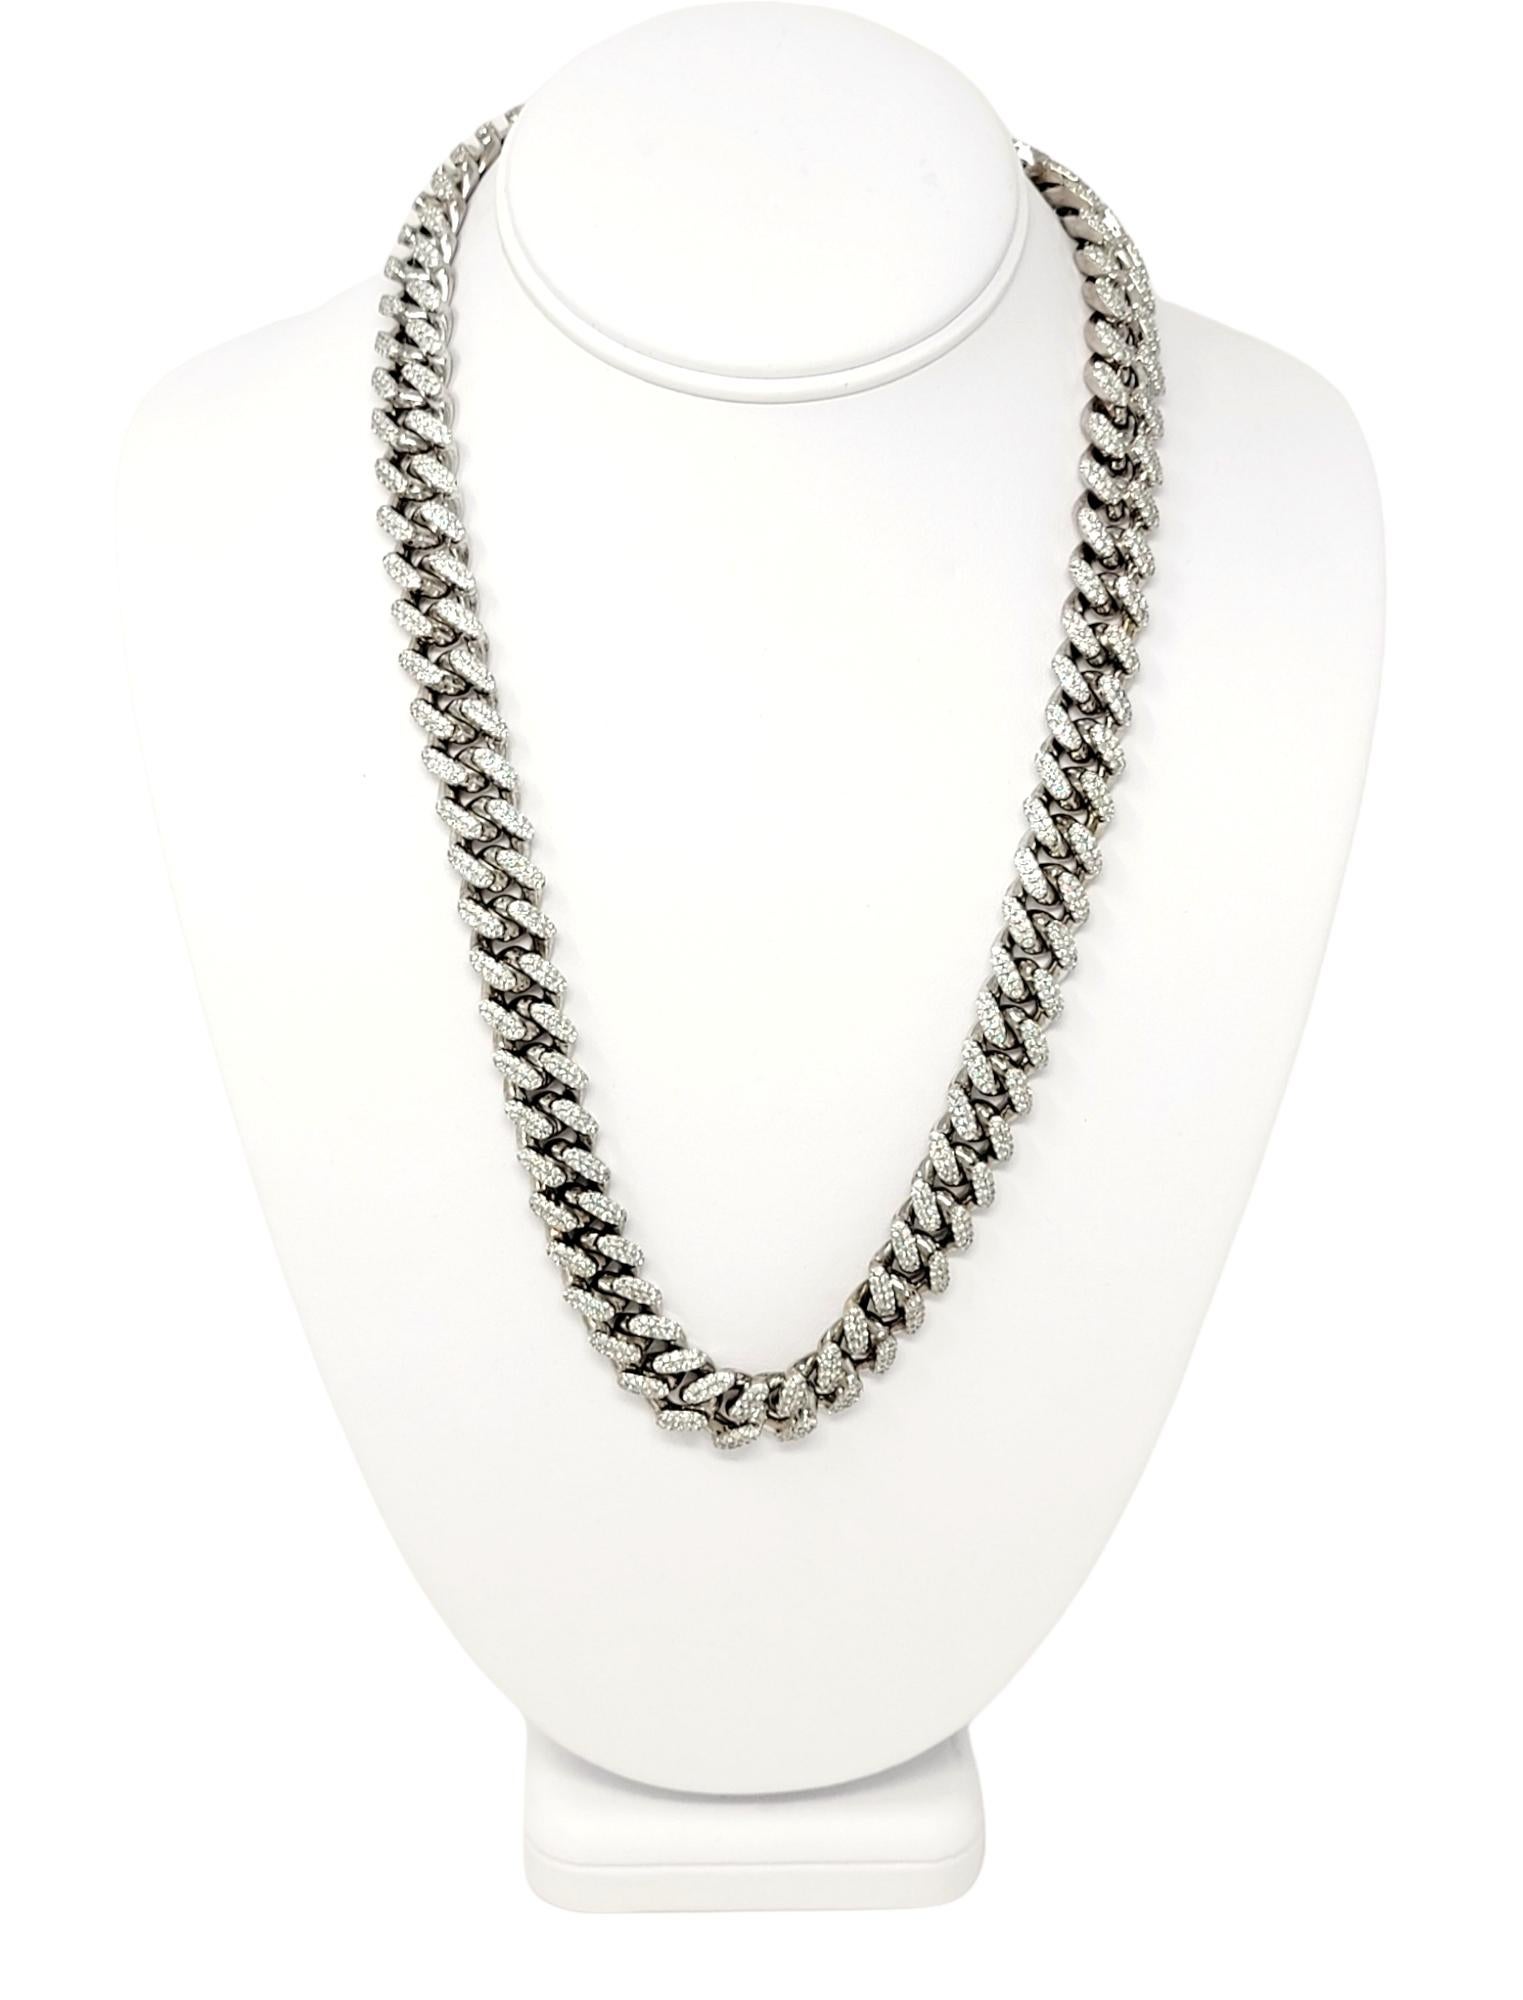 Diamond and White Gold Cuban Link Necklace 22.80 Carats in 14 Karat Gold For Sale 3